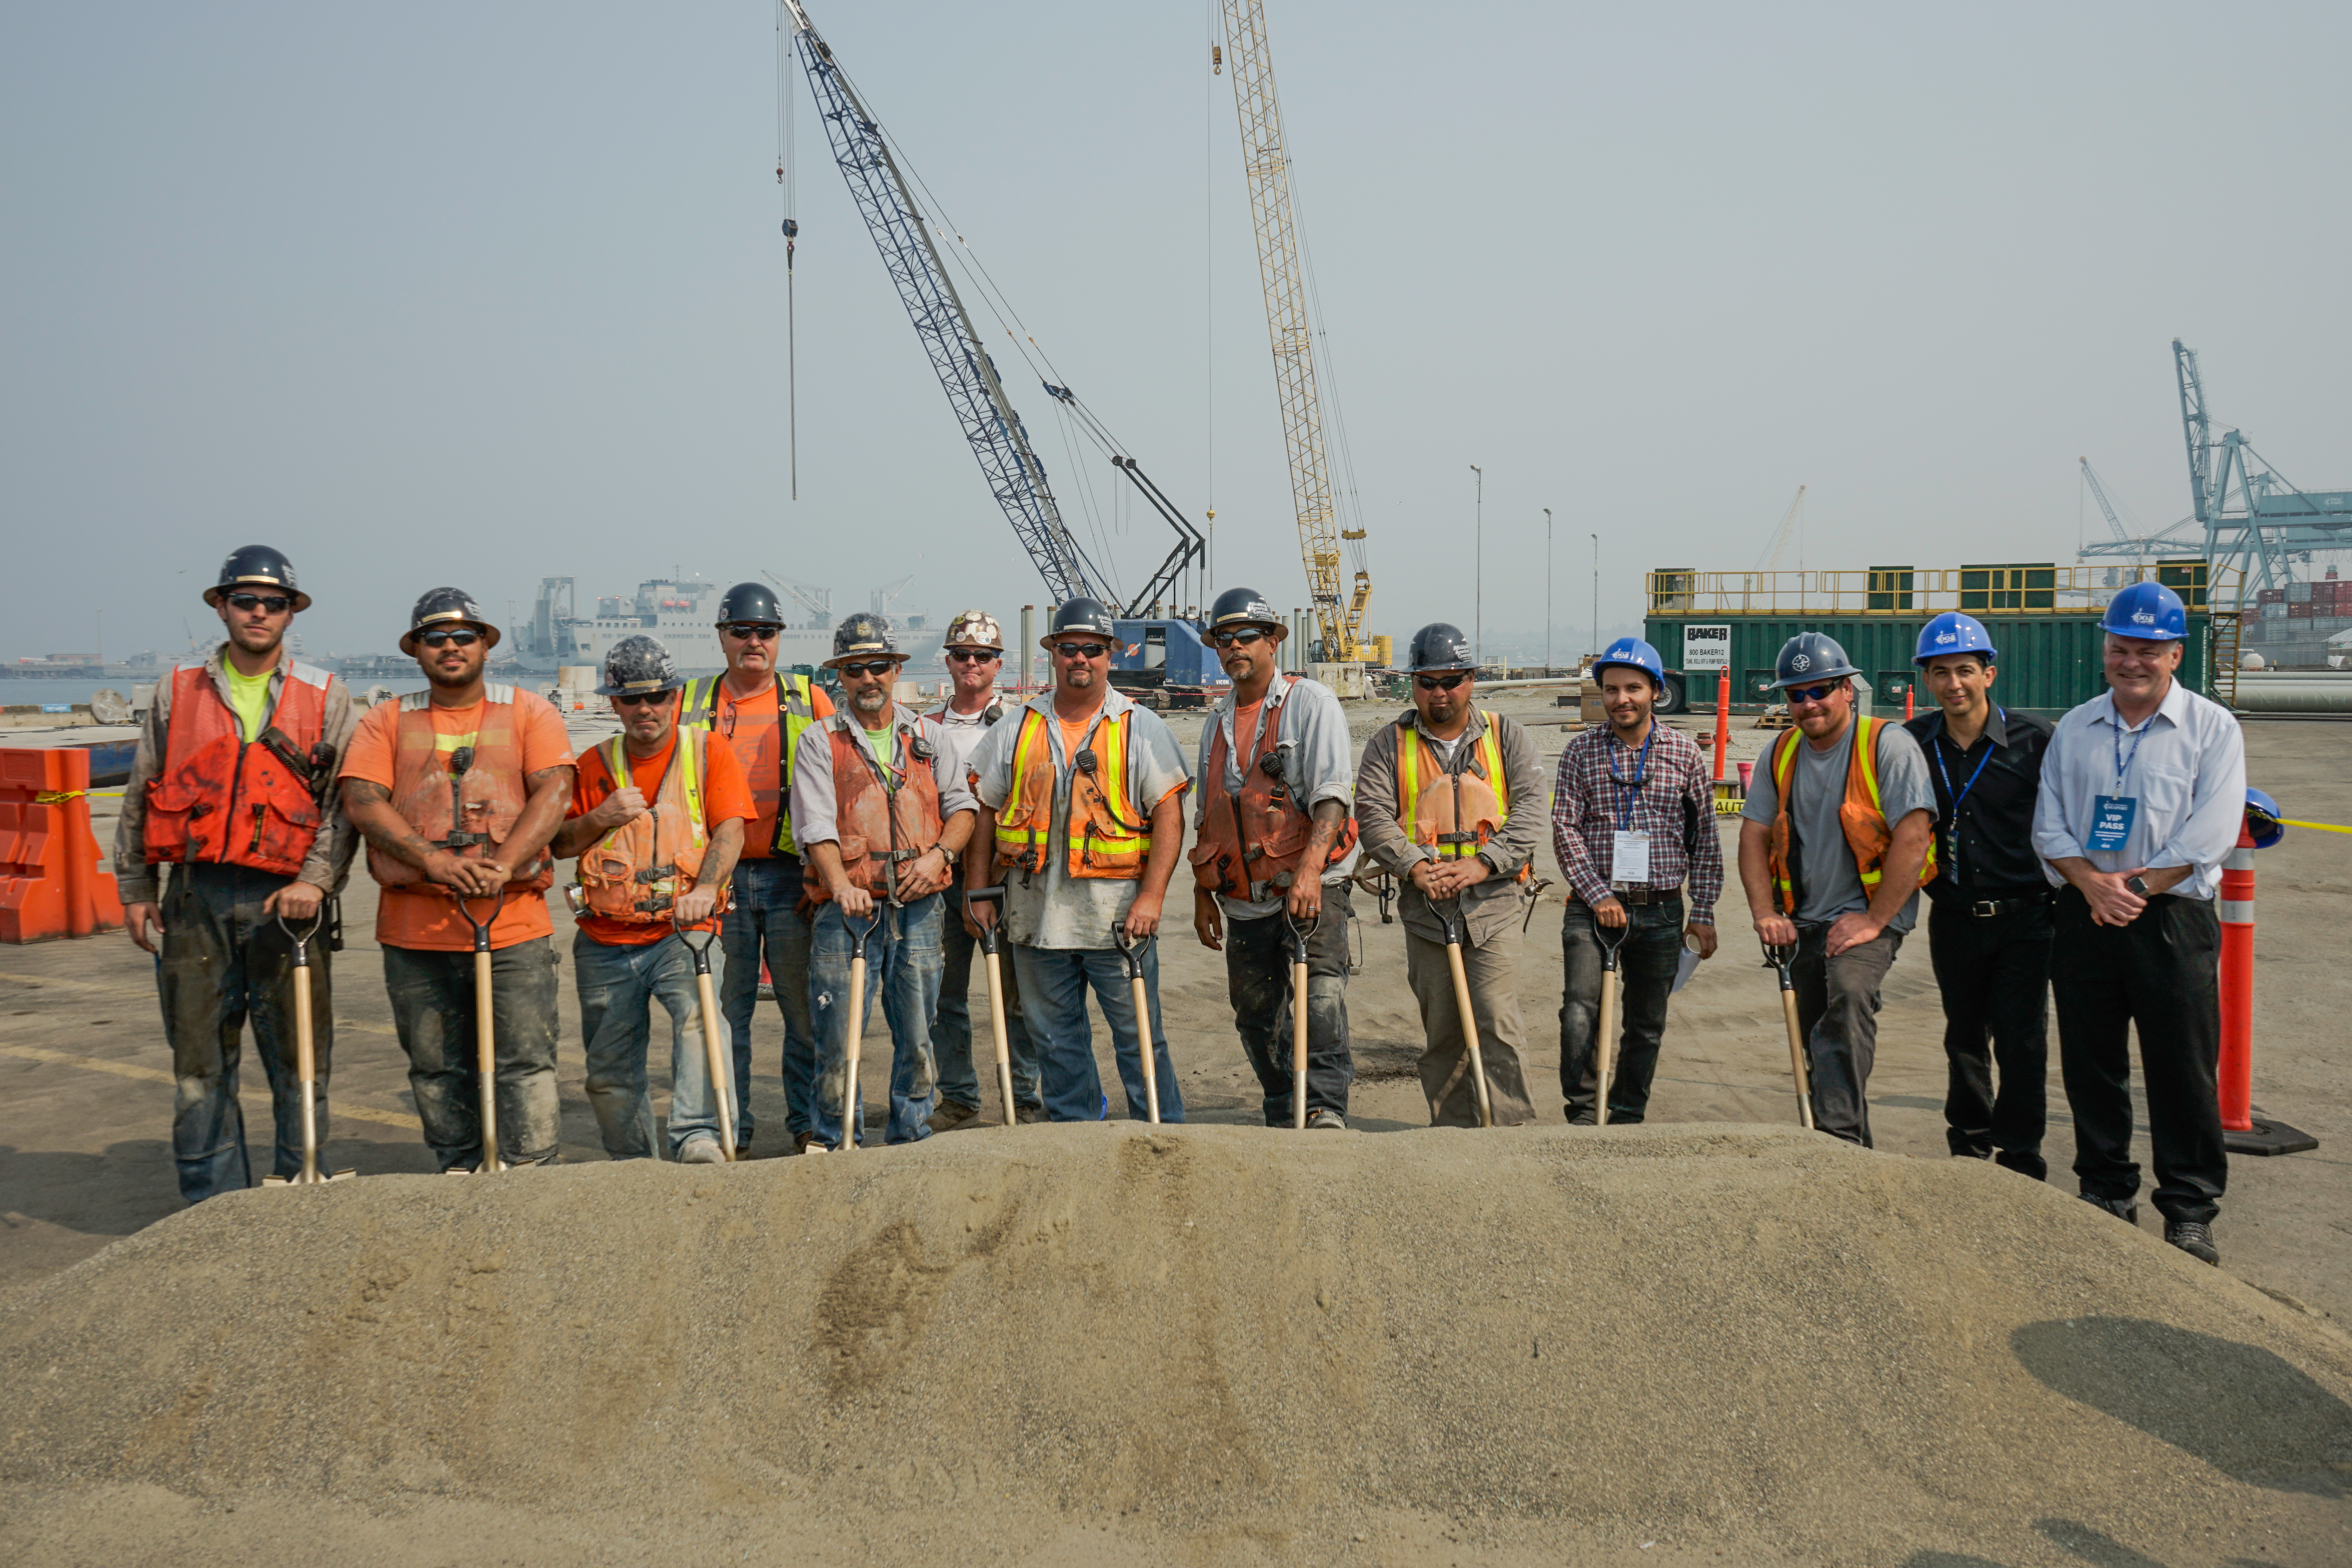 Dee Burch, President of AAC, Eric Ramirez-Barreto, Project Manager for the South Terminal Wharf Upgrade, and the Advanced American Construction Crew at the Groundbreaking Ceremony Aug. 15th